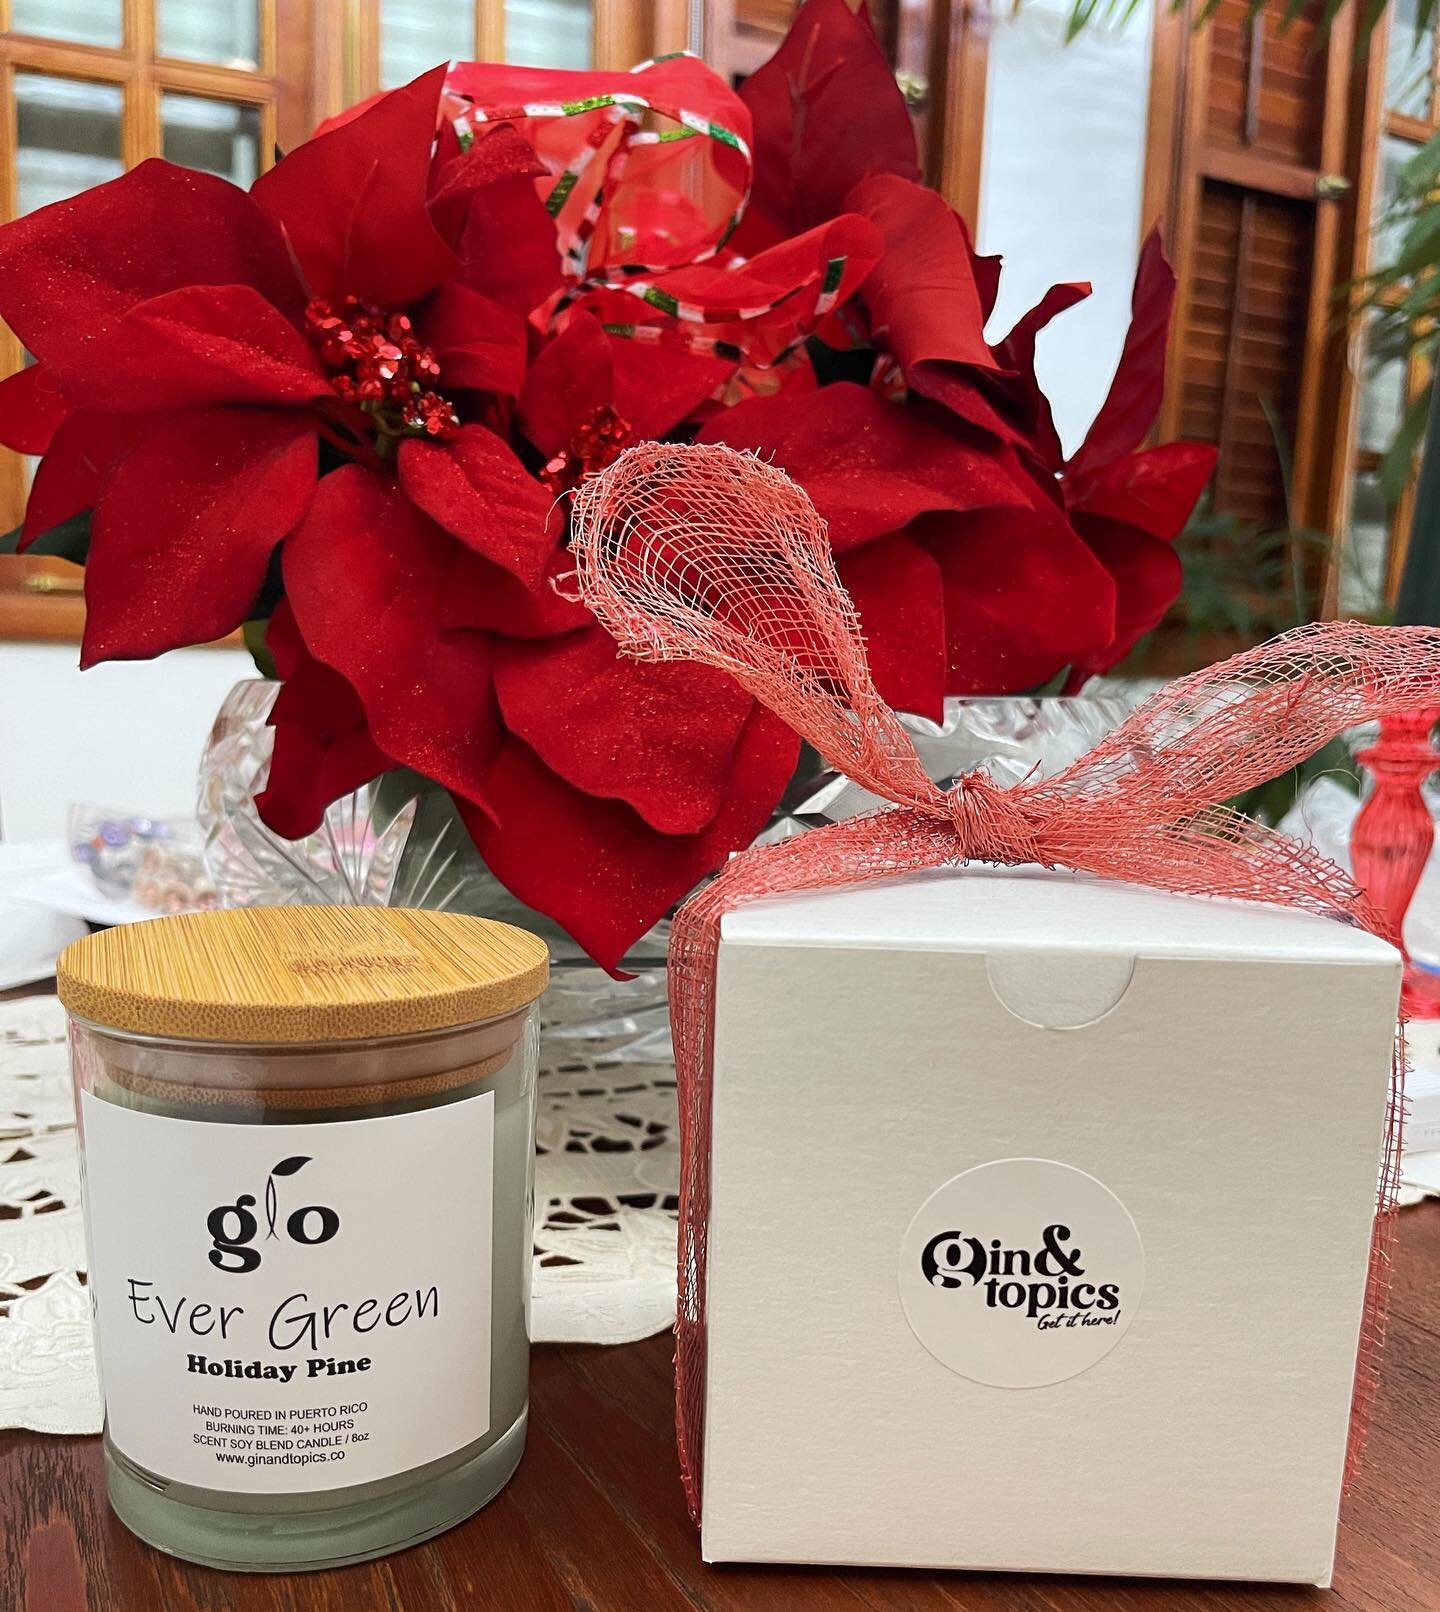 Gin &amp; Topics is back ✨ Just in time for this Holiday Season 🎄  Shop glo #candles 🕯️at @ginandtopicsshop